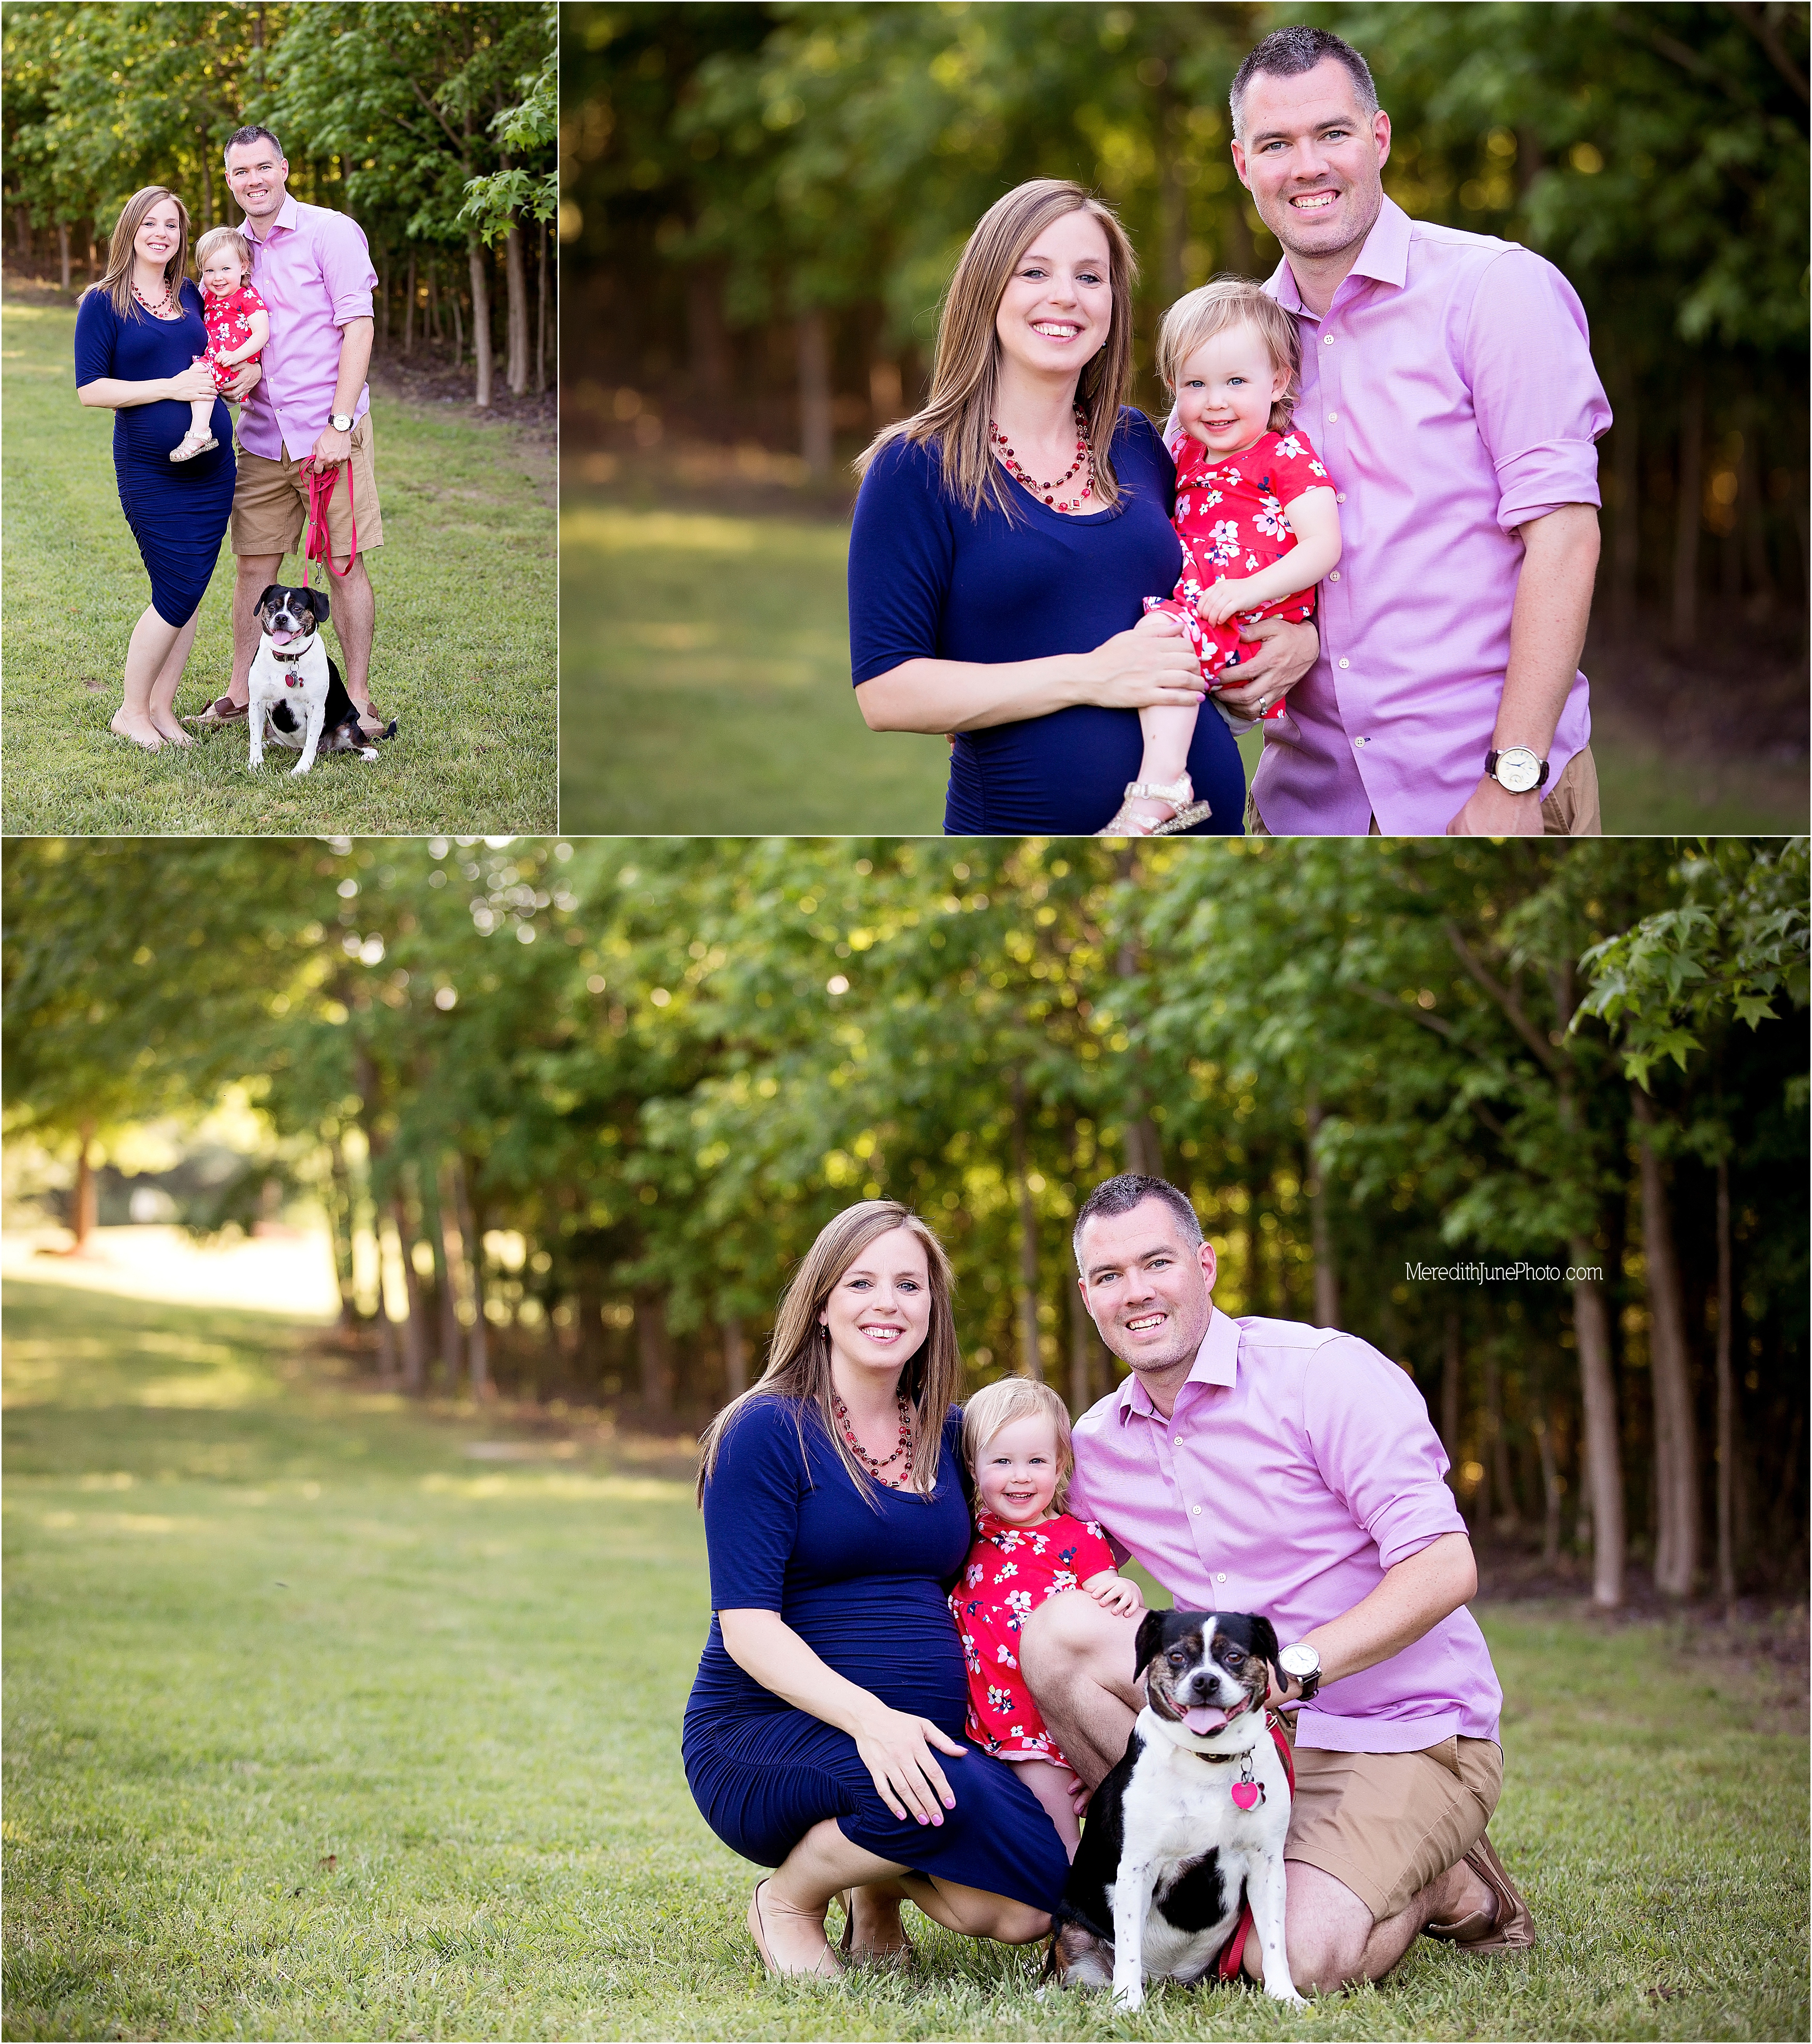 Spring maternity photo session in Charlotte by Meredith June Photography